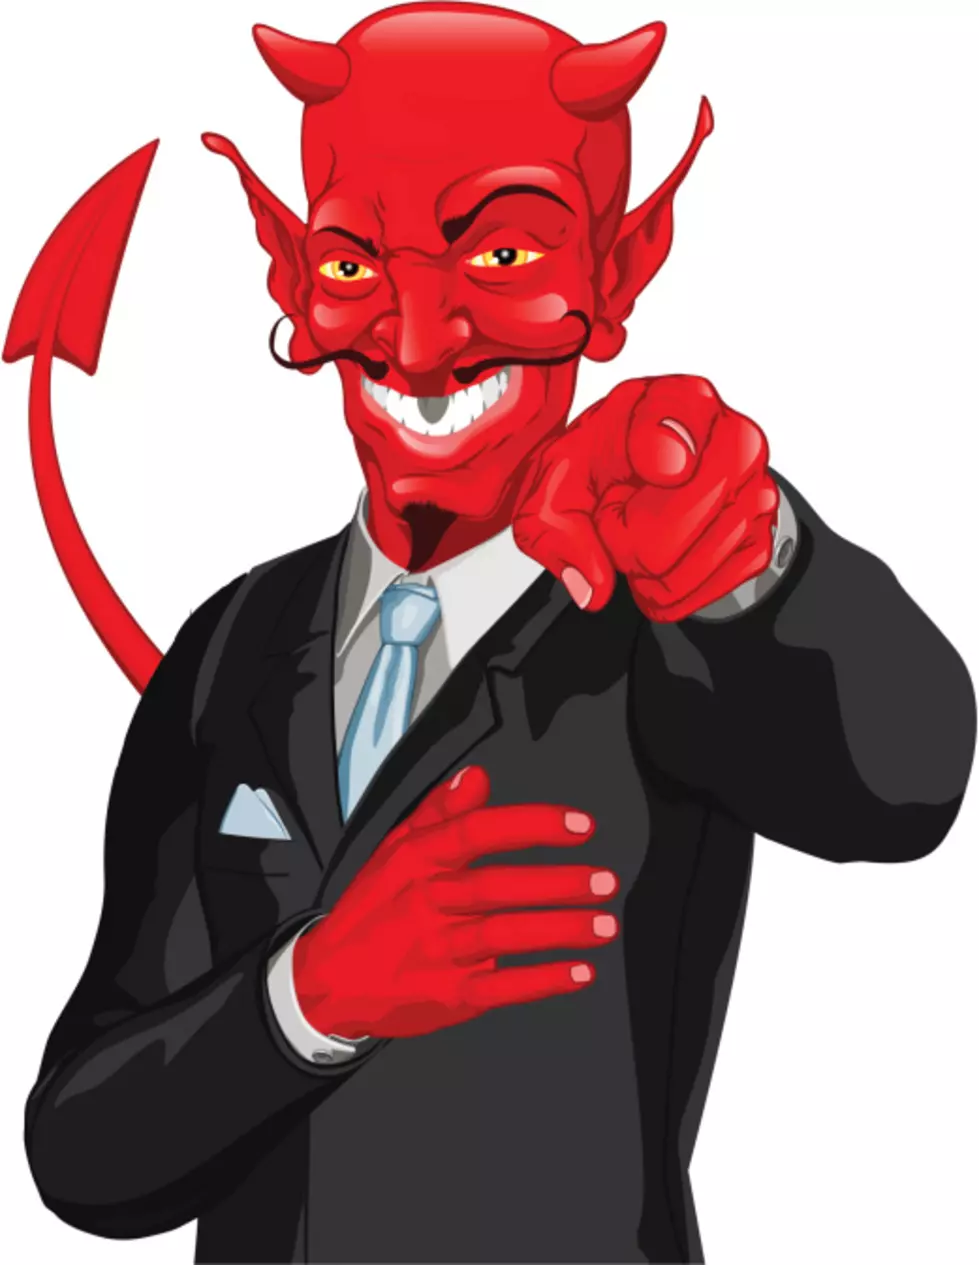 Satanists Troll Texas Law And Claim Religious Exemption From New Abortion Law